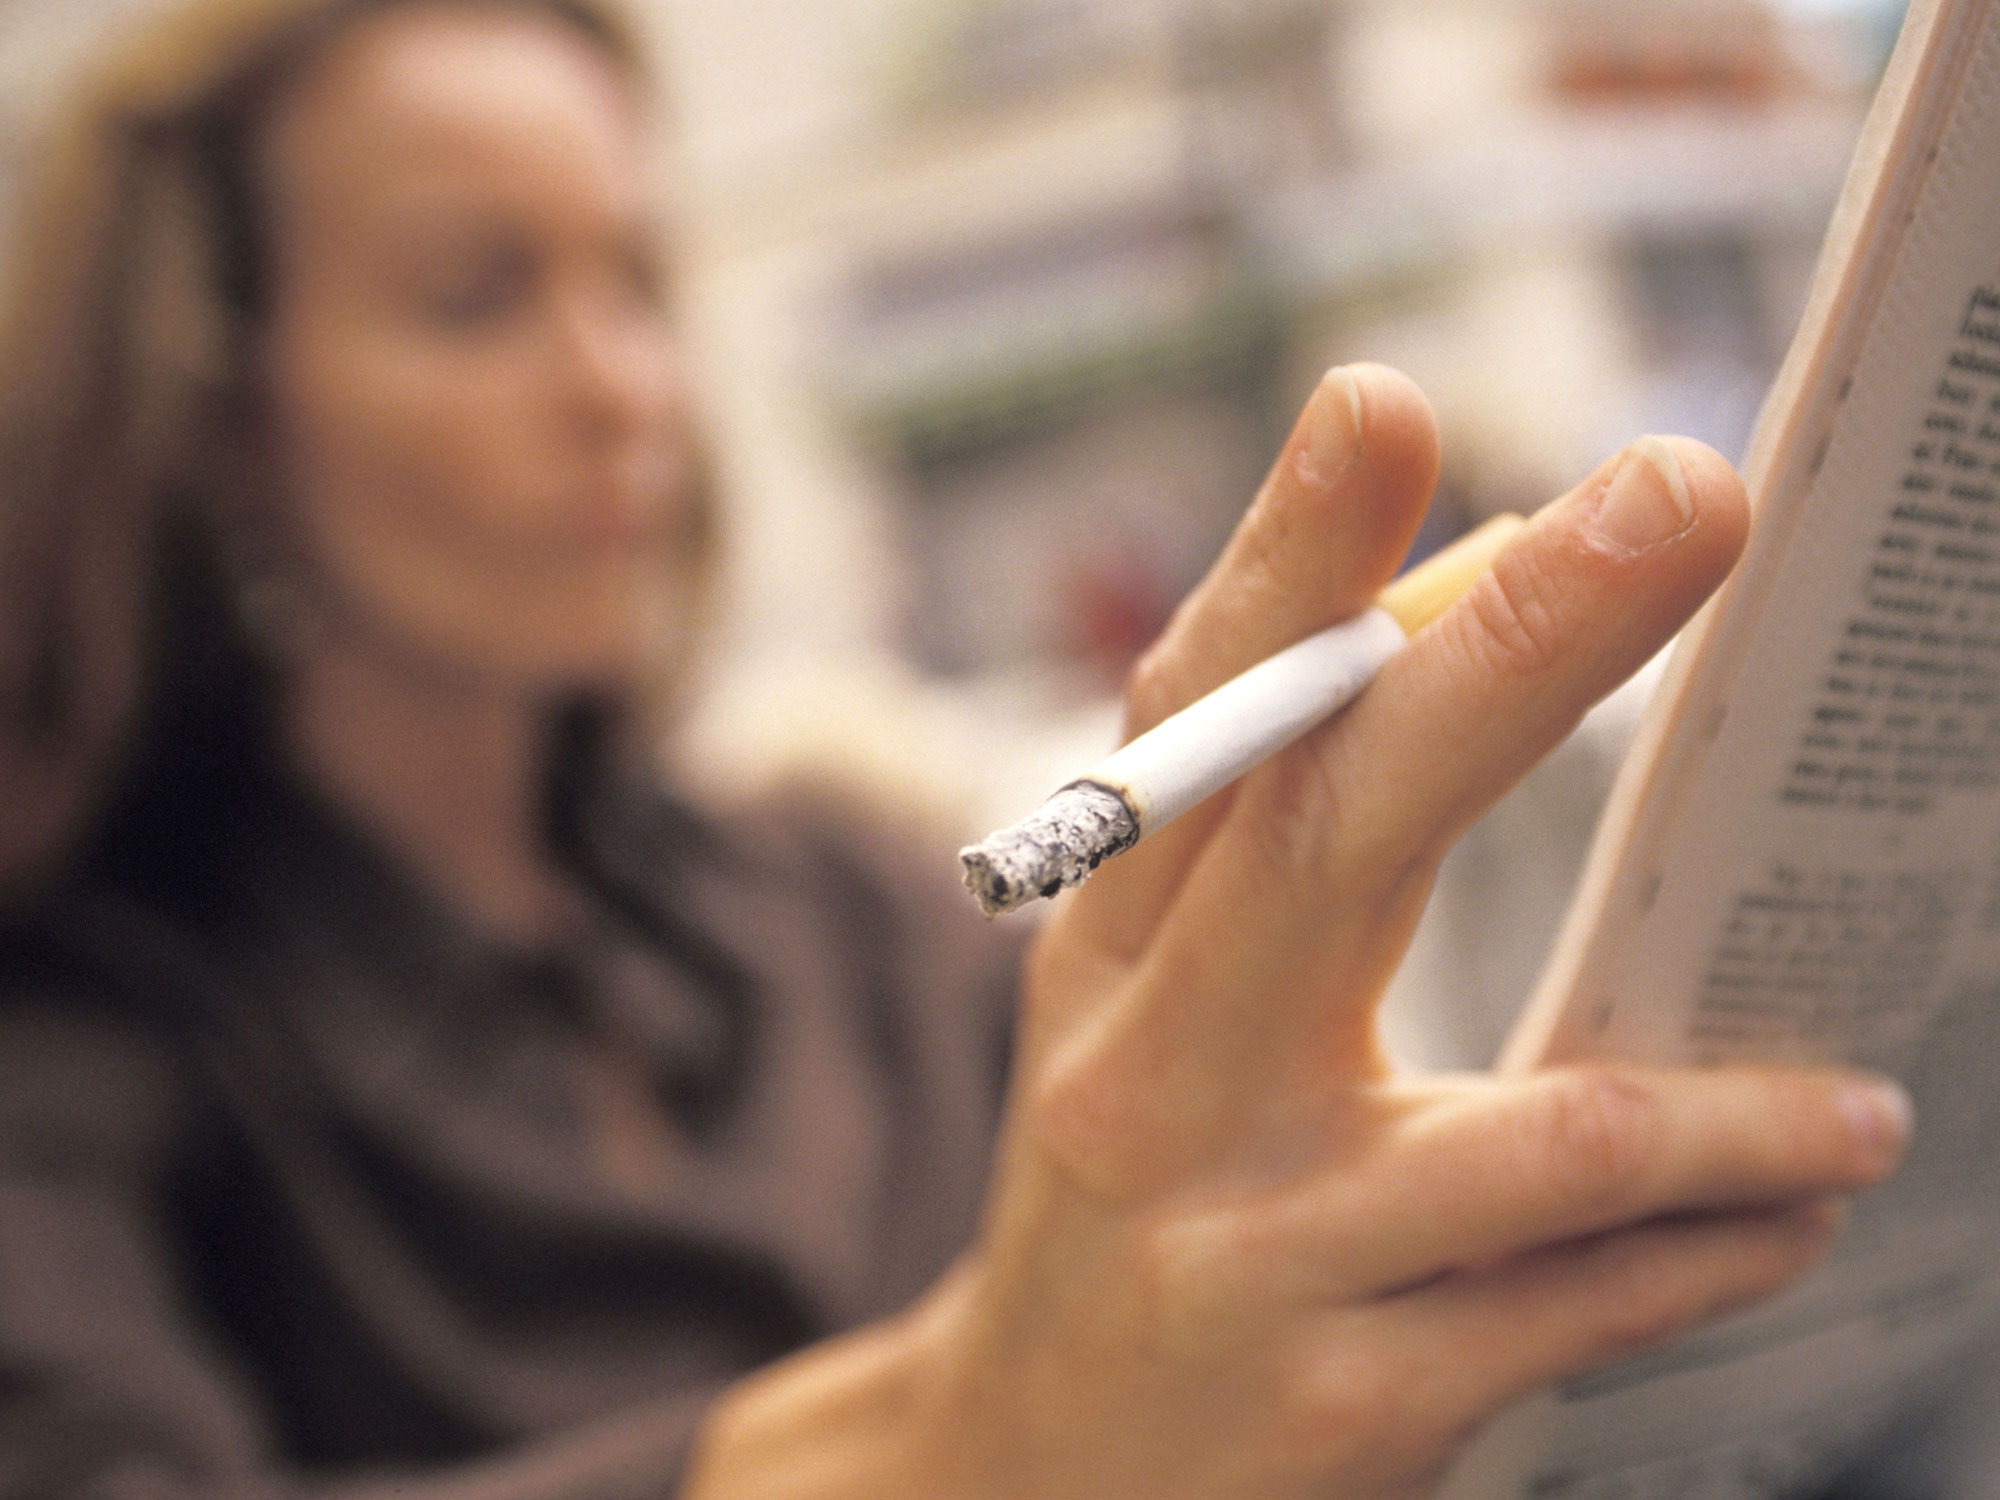 Why this may be the worst way to quit smoking